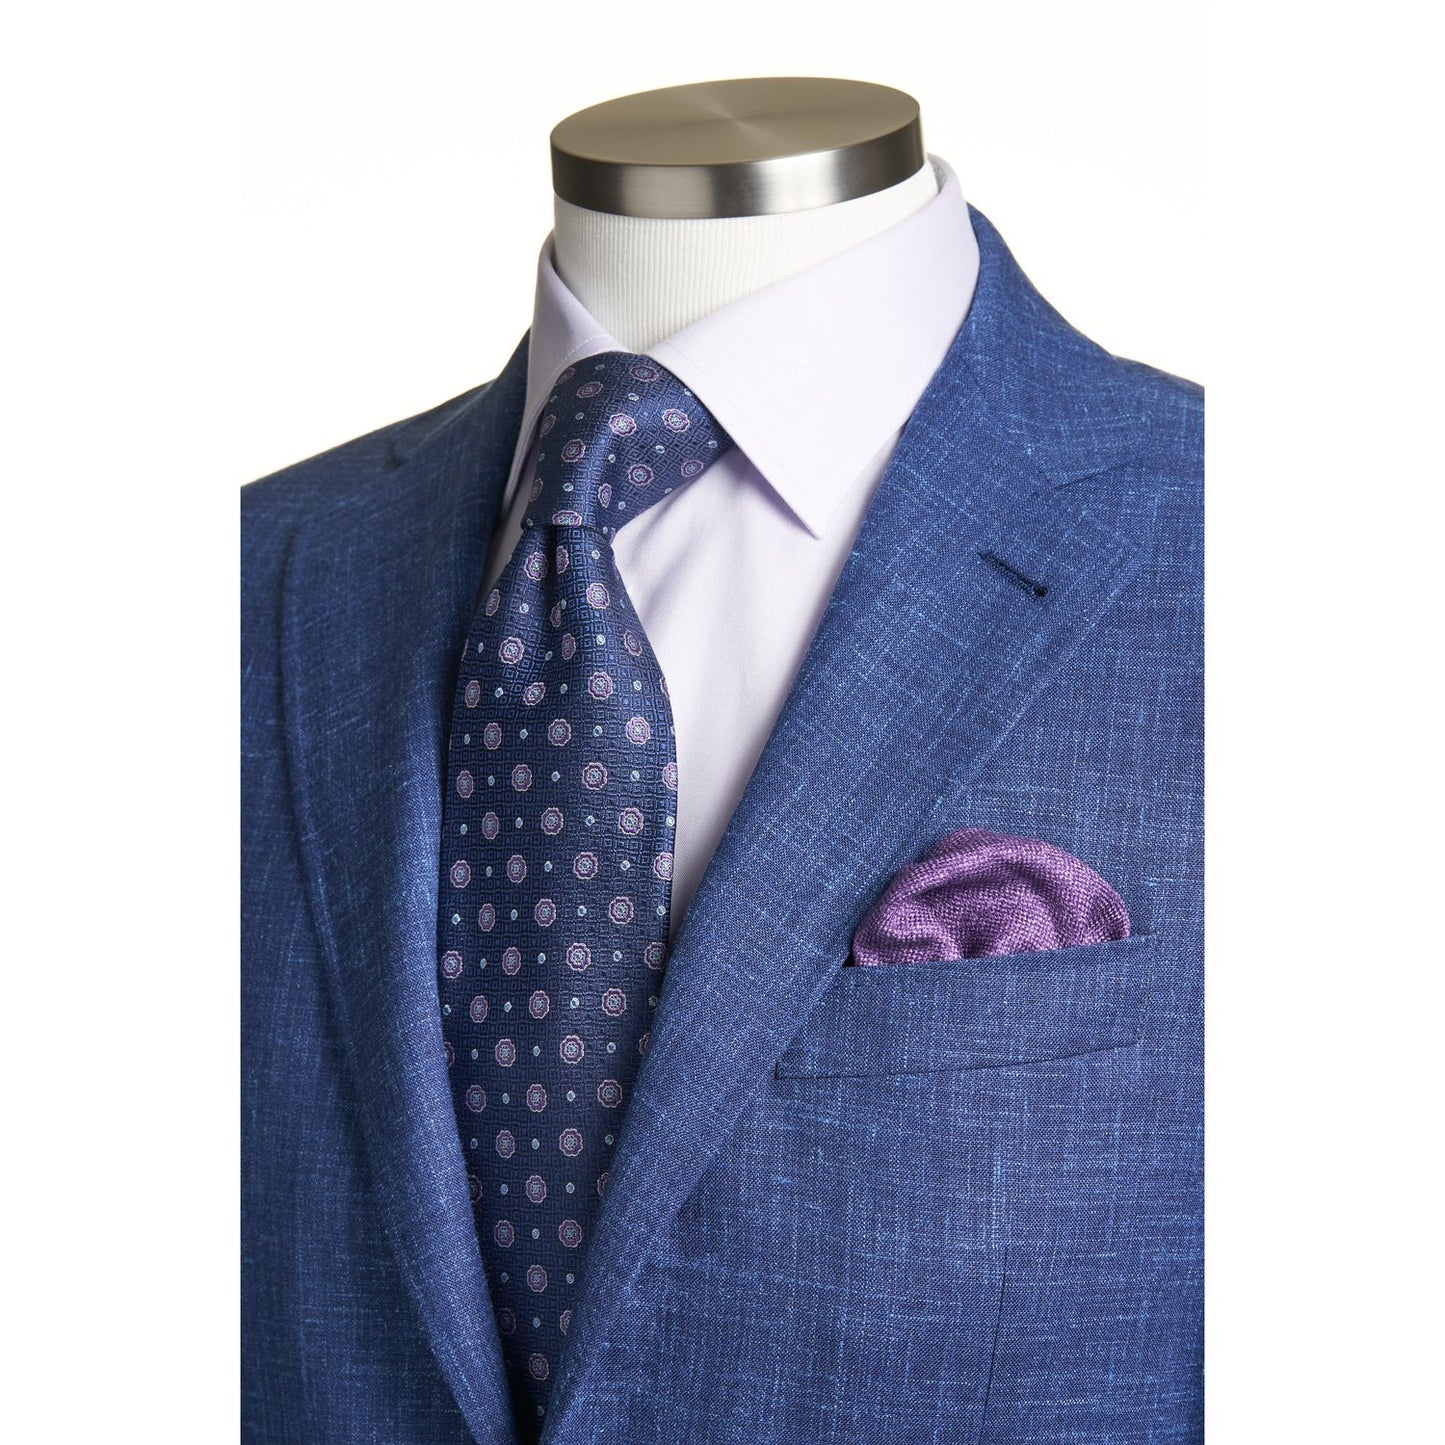 Canali Kei Model Wool and Linen Blend Suit in Blue